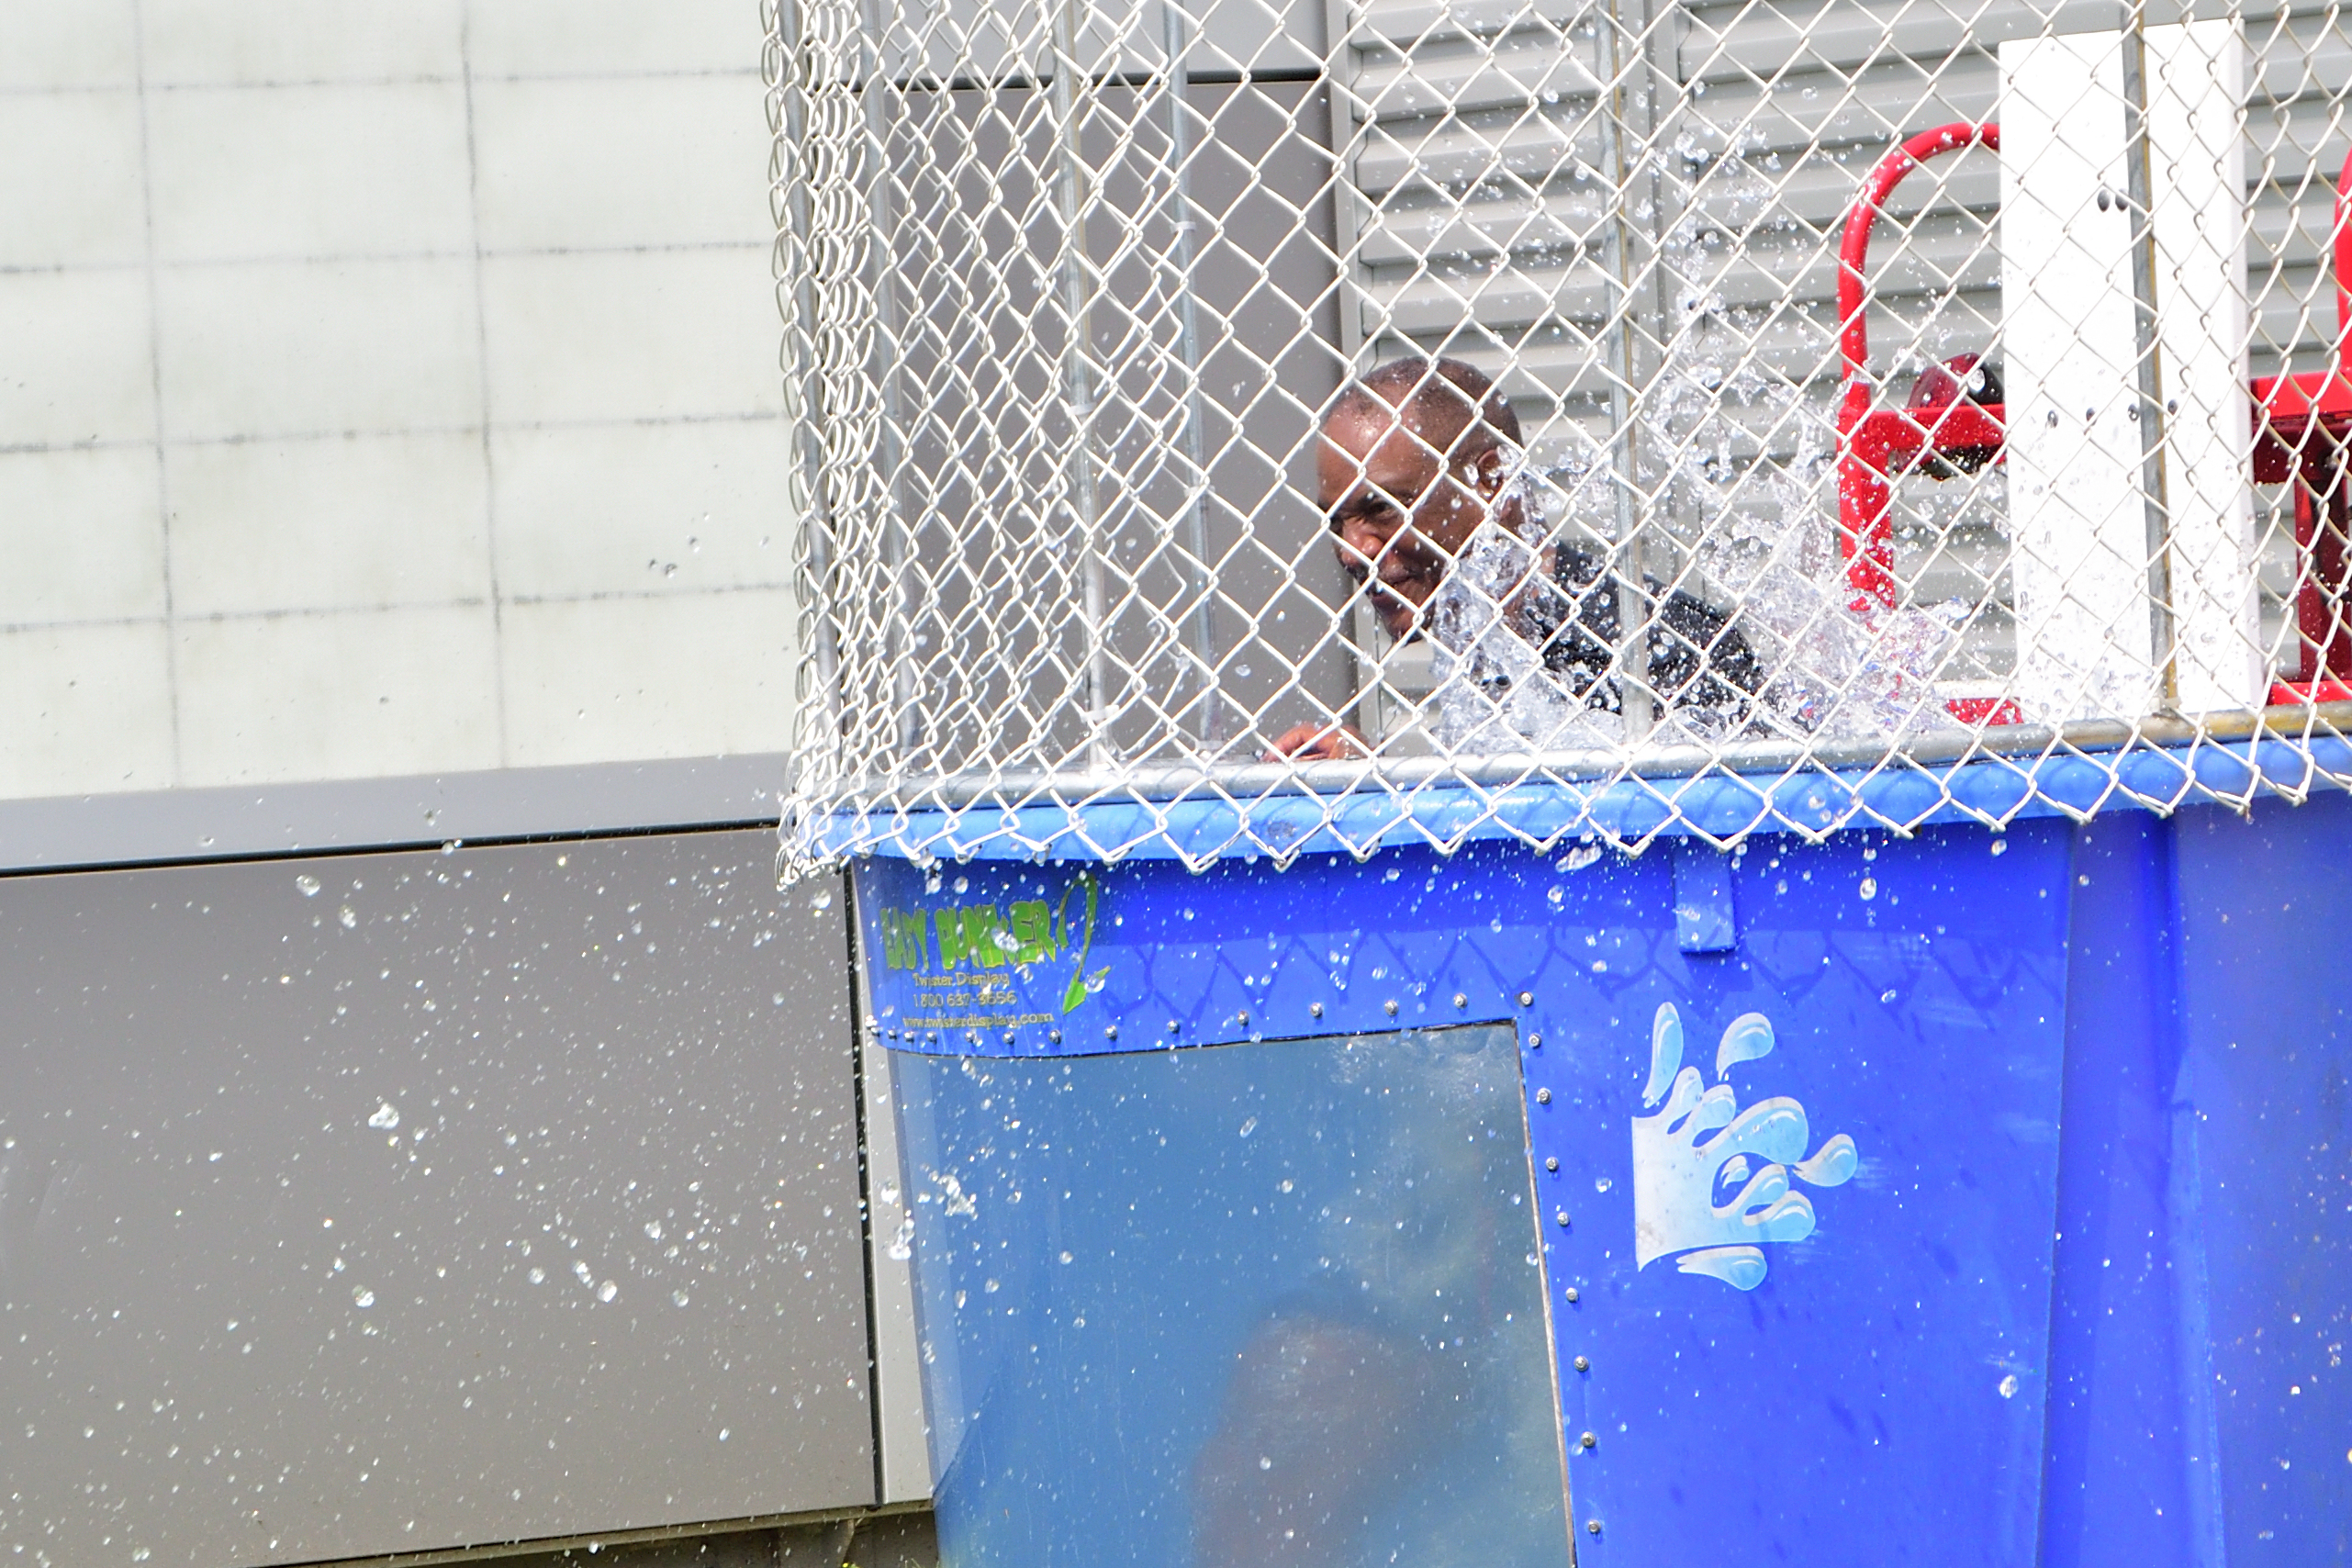 Dunk Tank, Community Festival 2021, 5th District Chicago Police Headquarters, July 17, 2021 (pic by Emi Yamamoto)